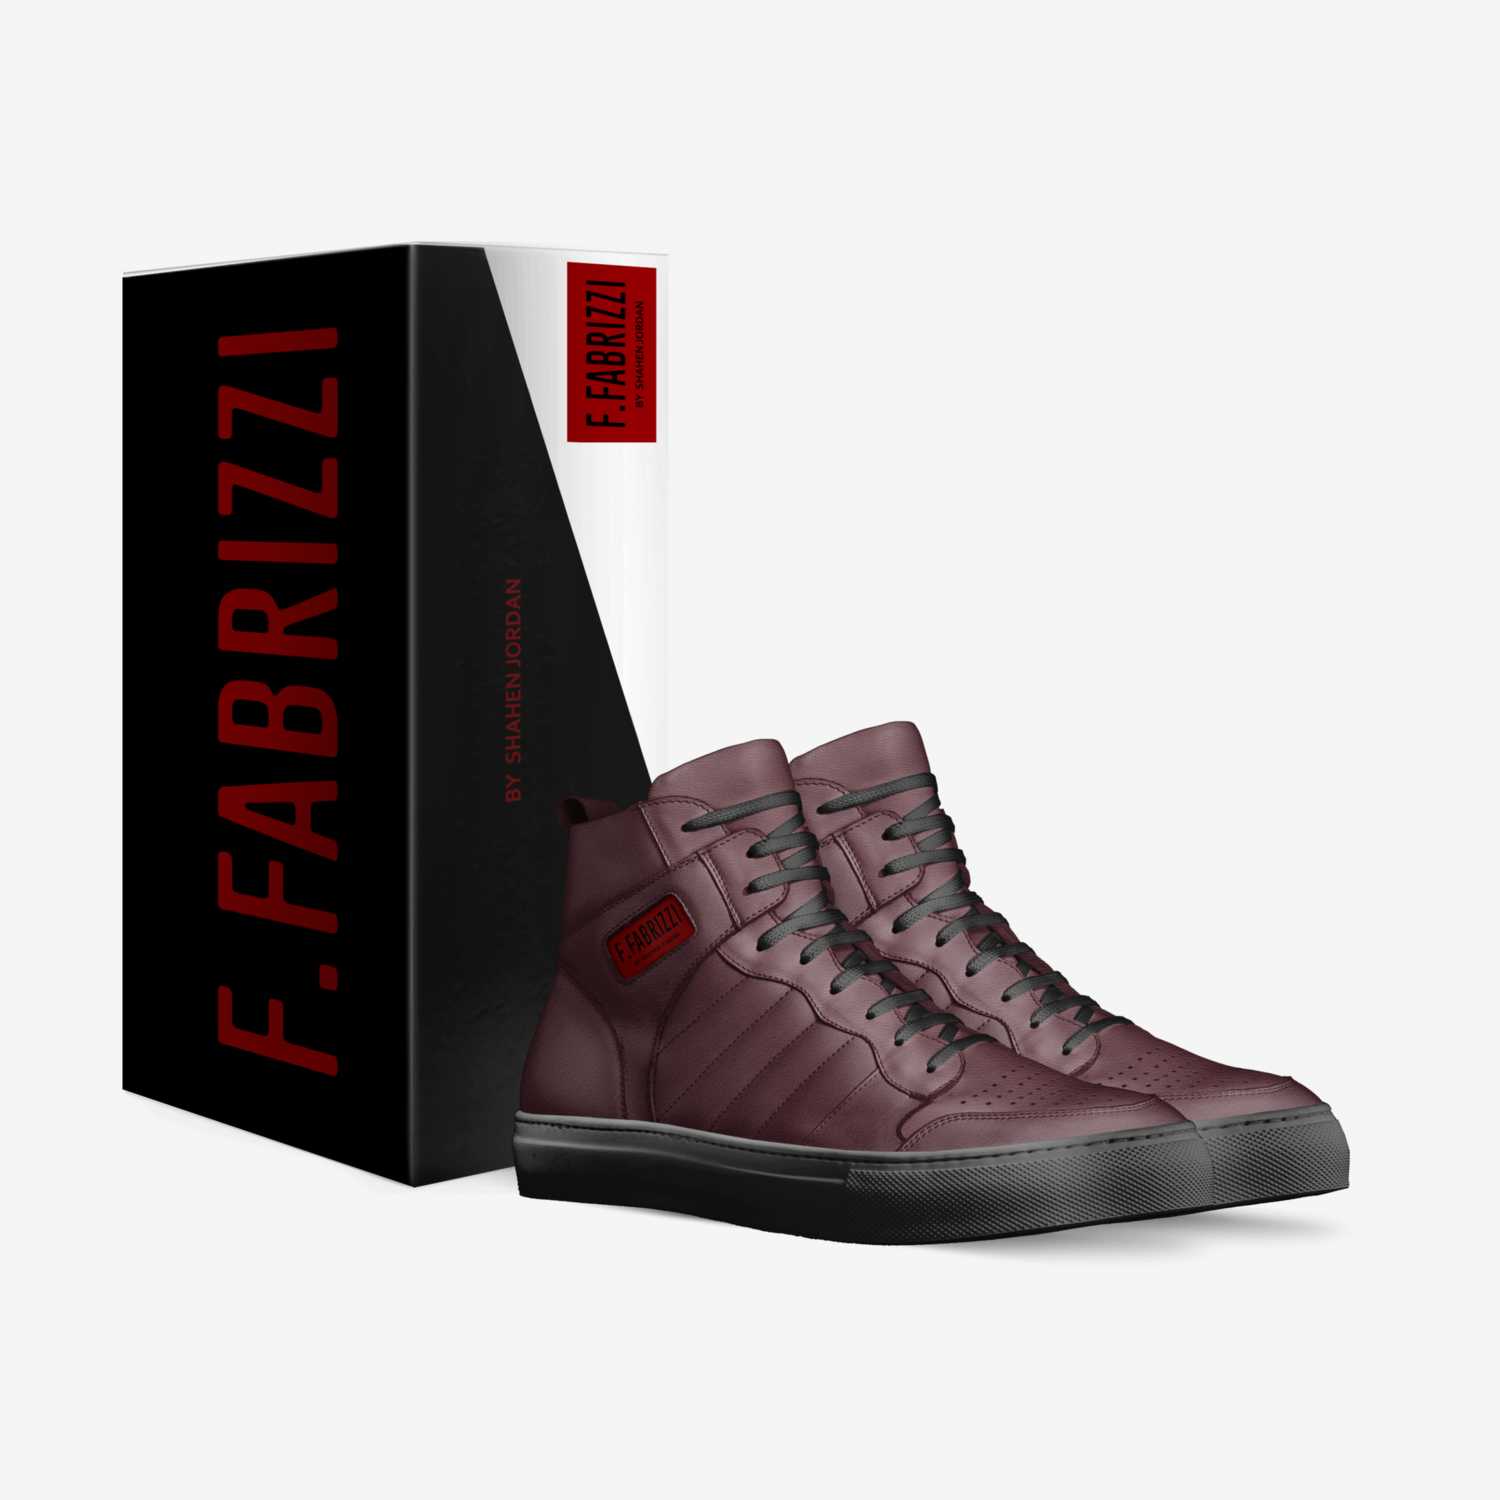 F.FABRIZZI custom made in Italy shoes by Shahen Jordan | Box view